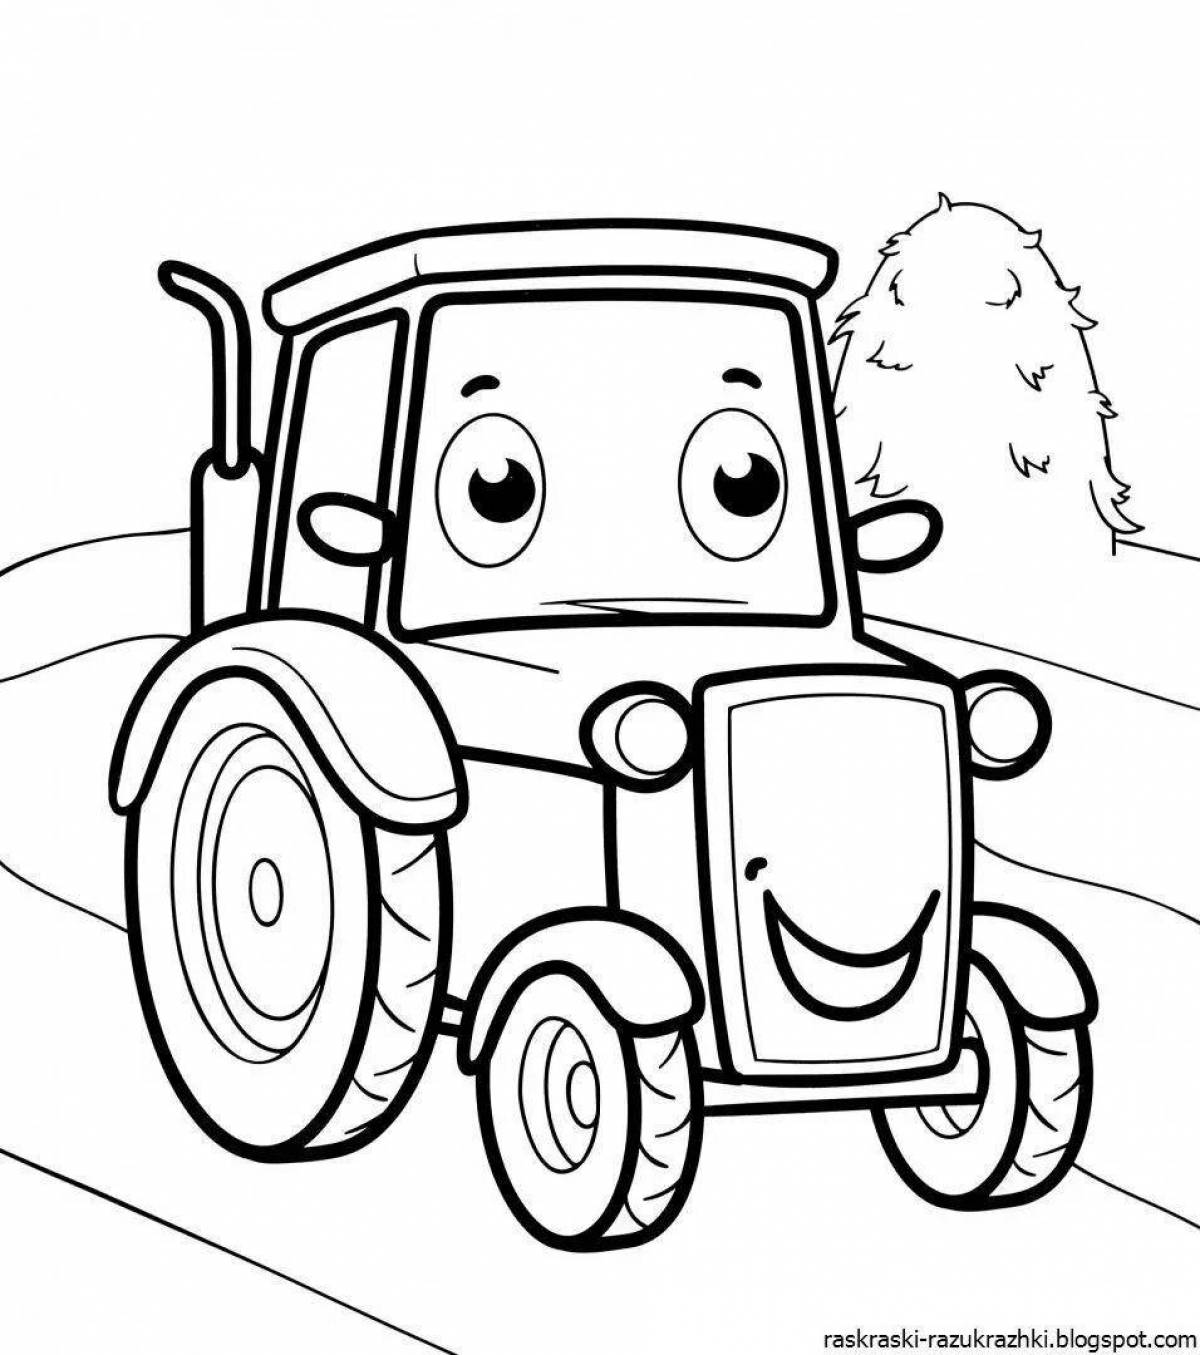 Exciting tractor coloring book for children 2-3 years old